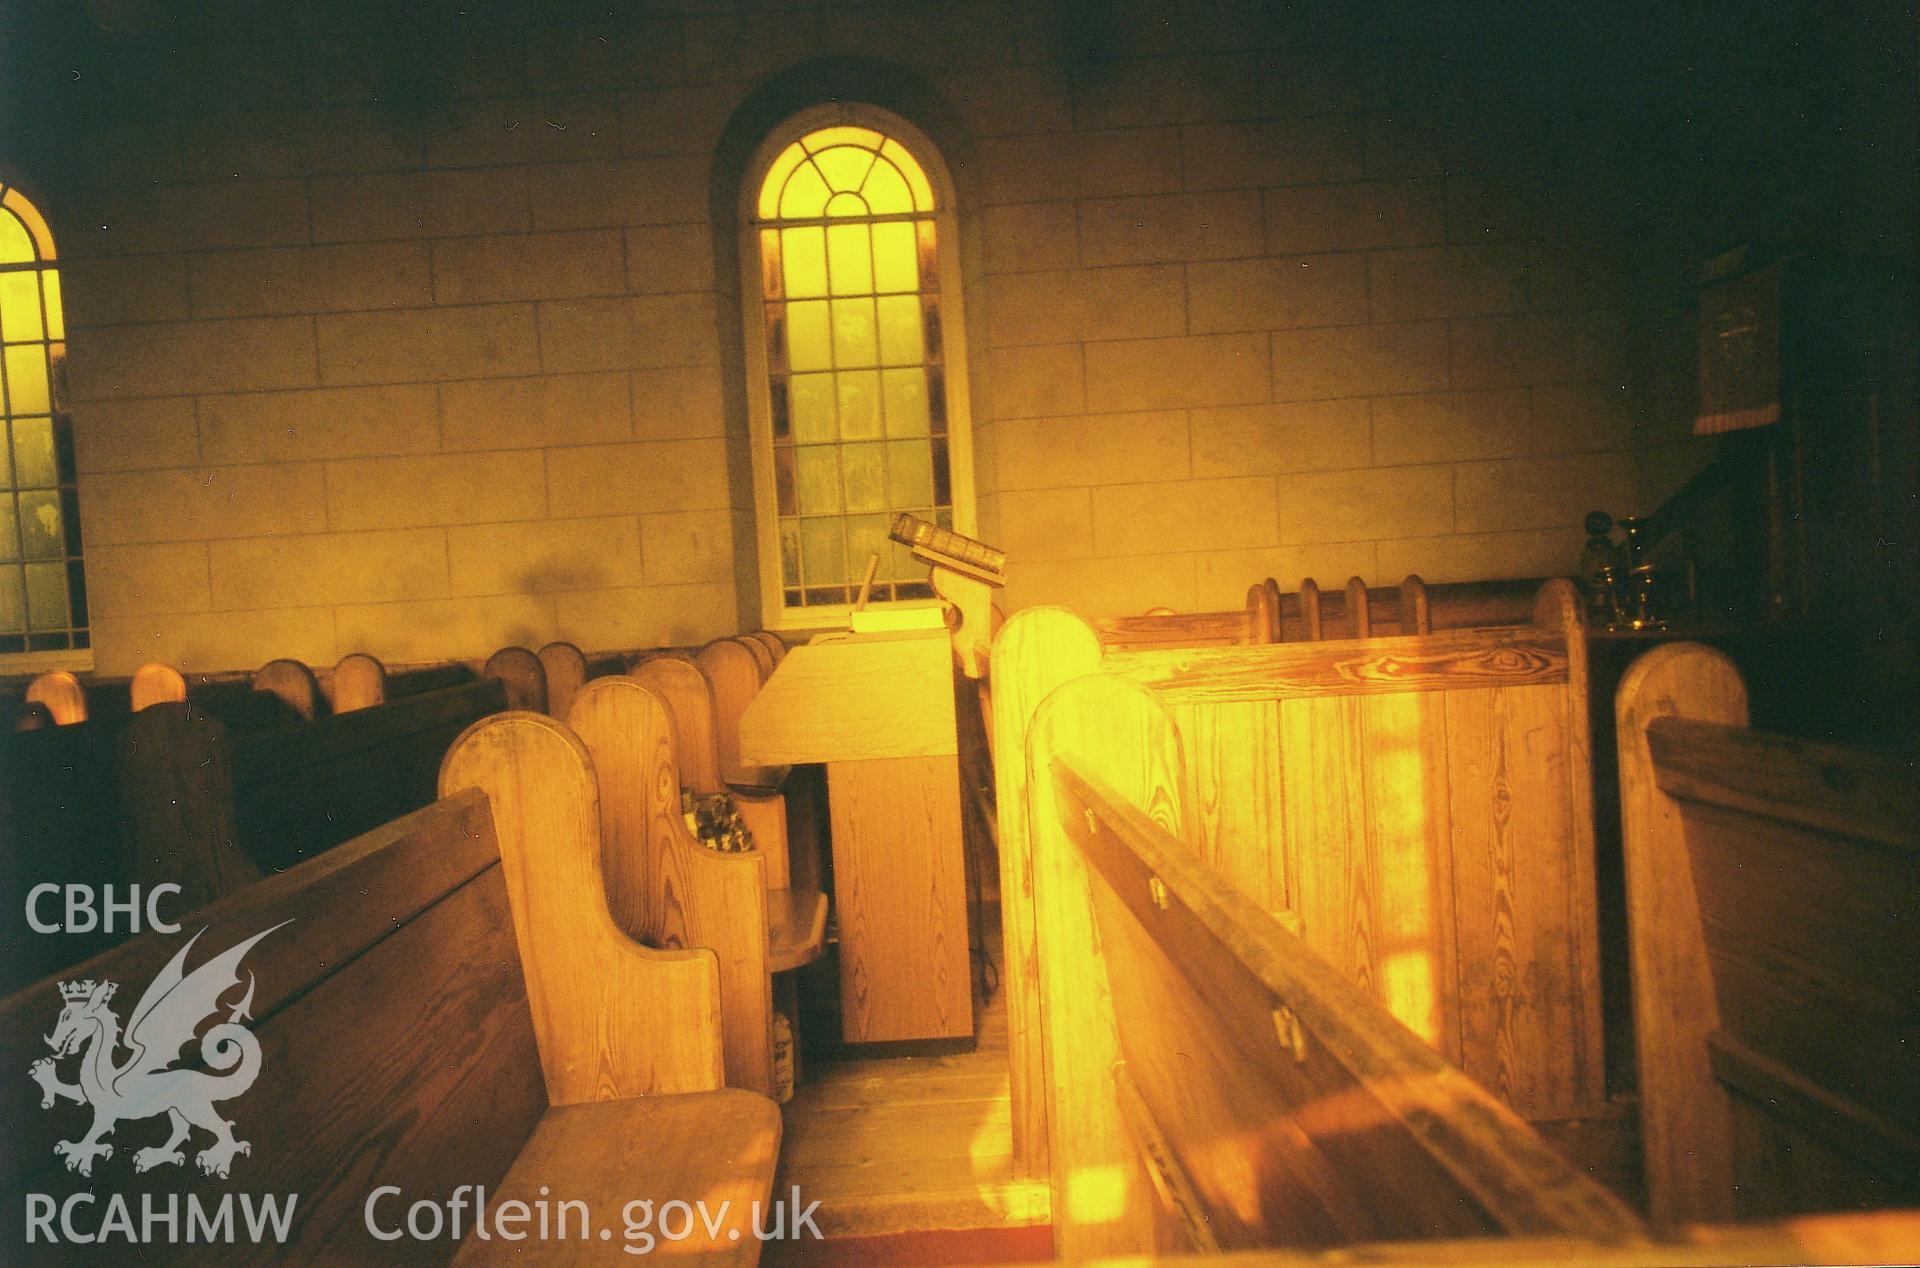 Digital copy of a colour photograph showing an interior view of Bethel Calvinistic Methodist Chapel, Puncheston,  taken by Robert Scourfield, 1995.